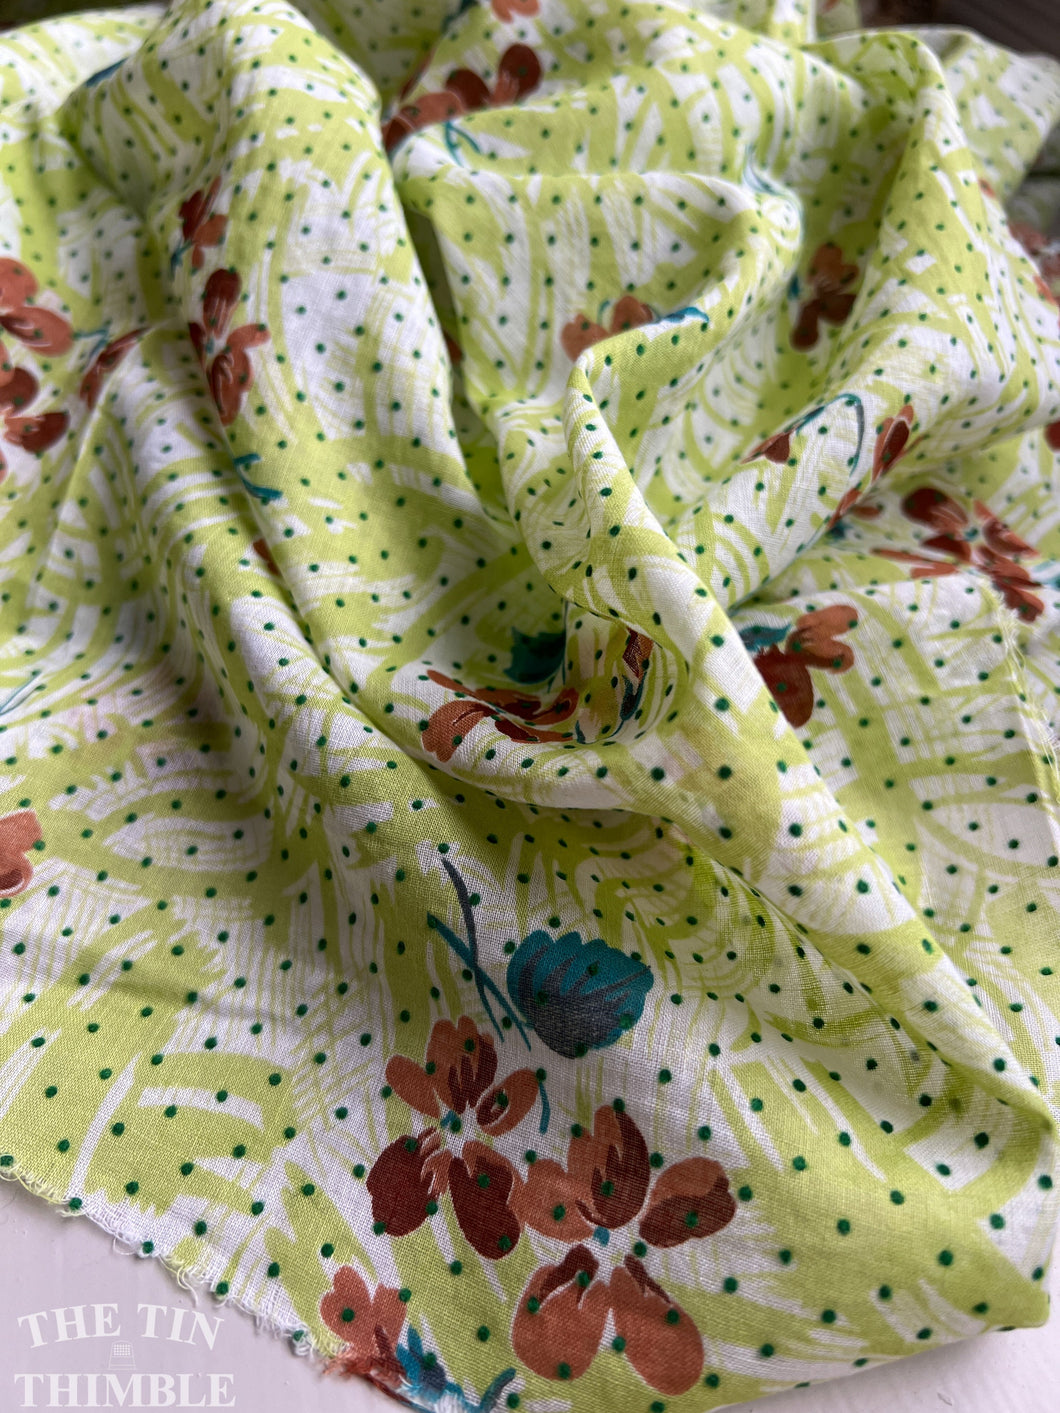 Dotted Swiss Fabric - Vintage 1960s Raised Dotted Swiss Piece in Green, White, Brown and Blue - Cotton - By the Yard x 34